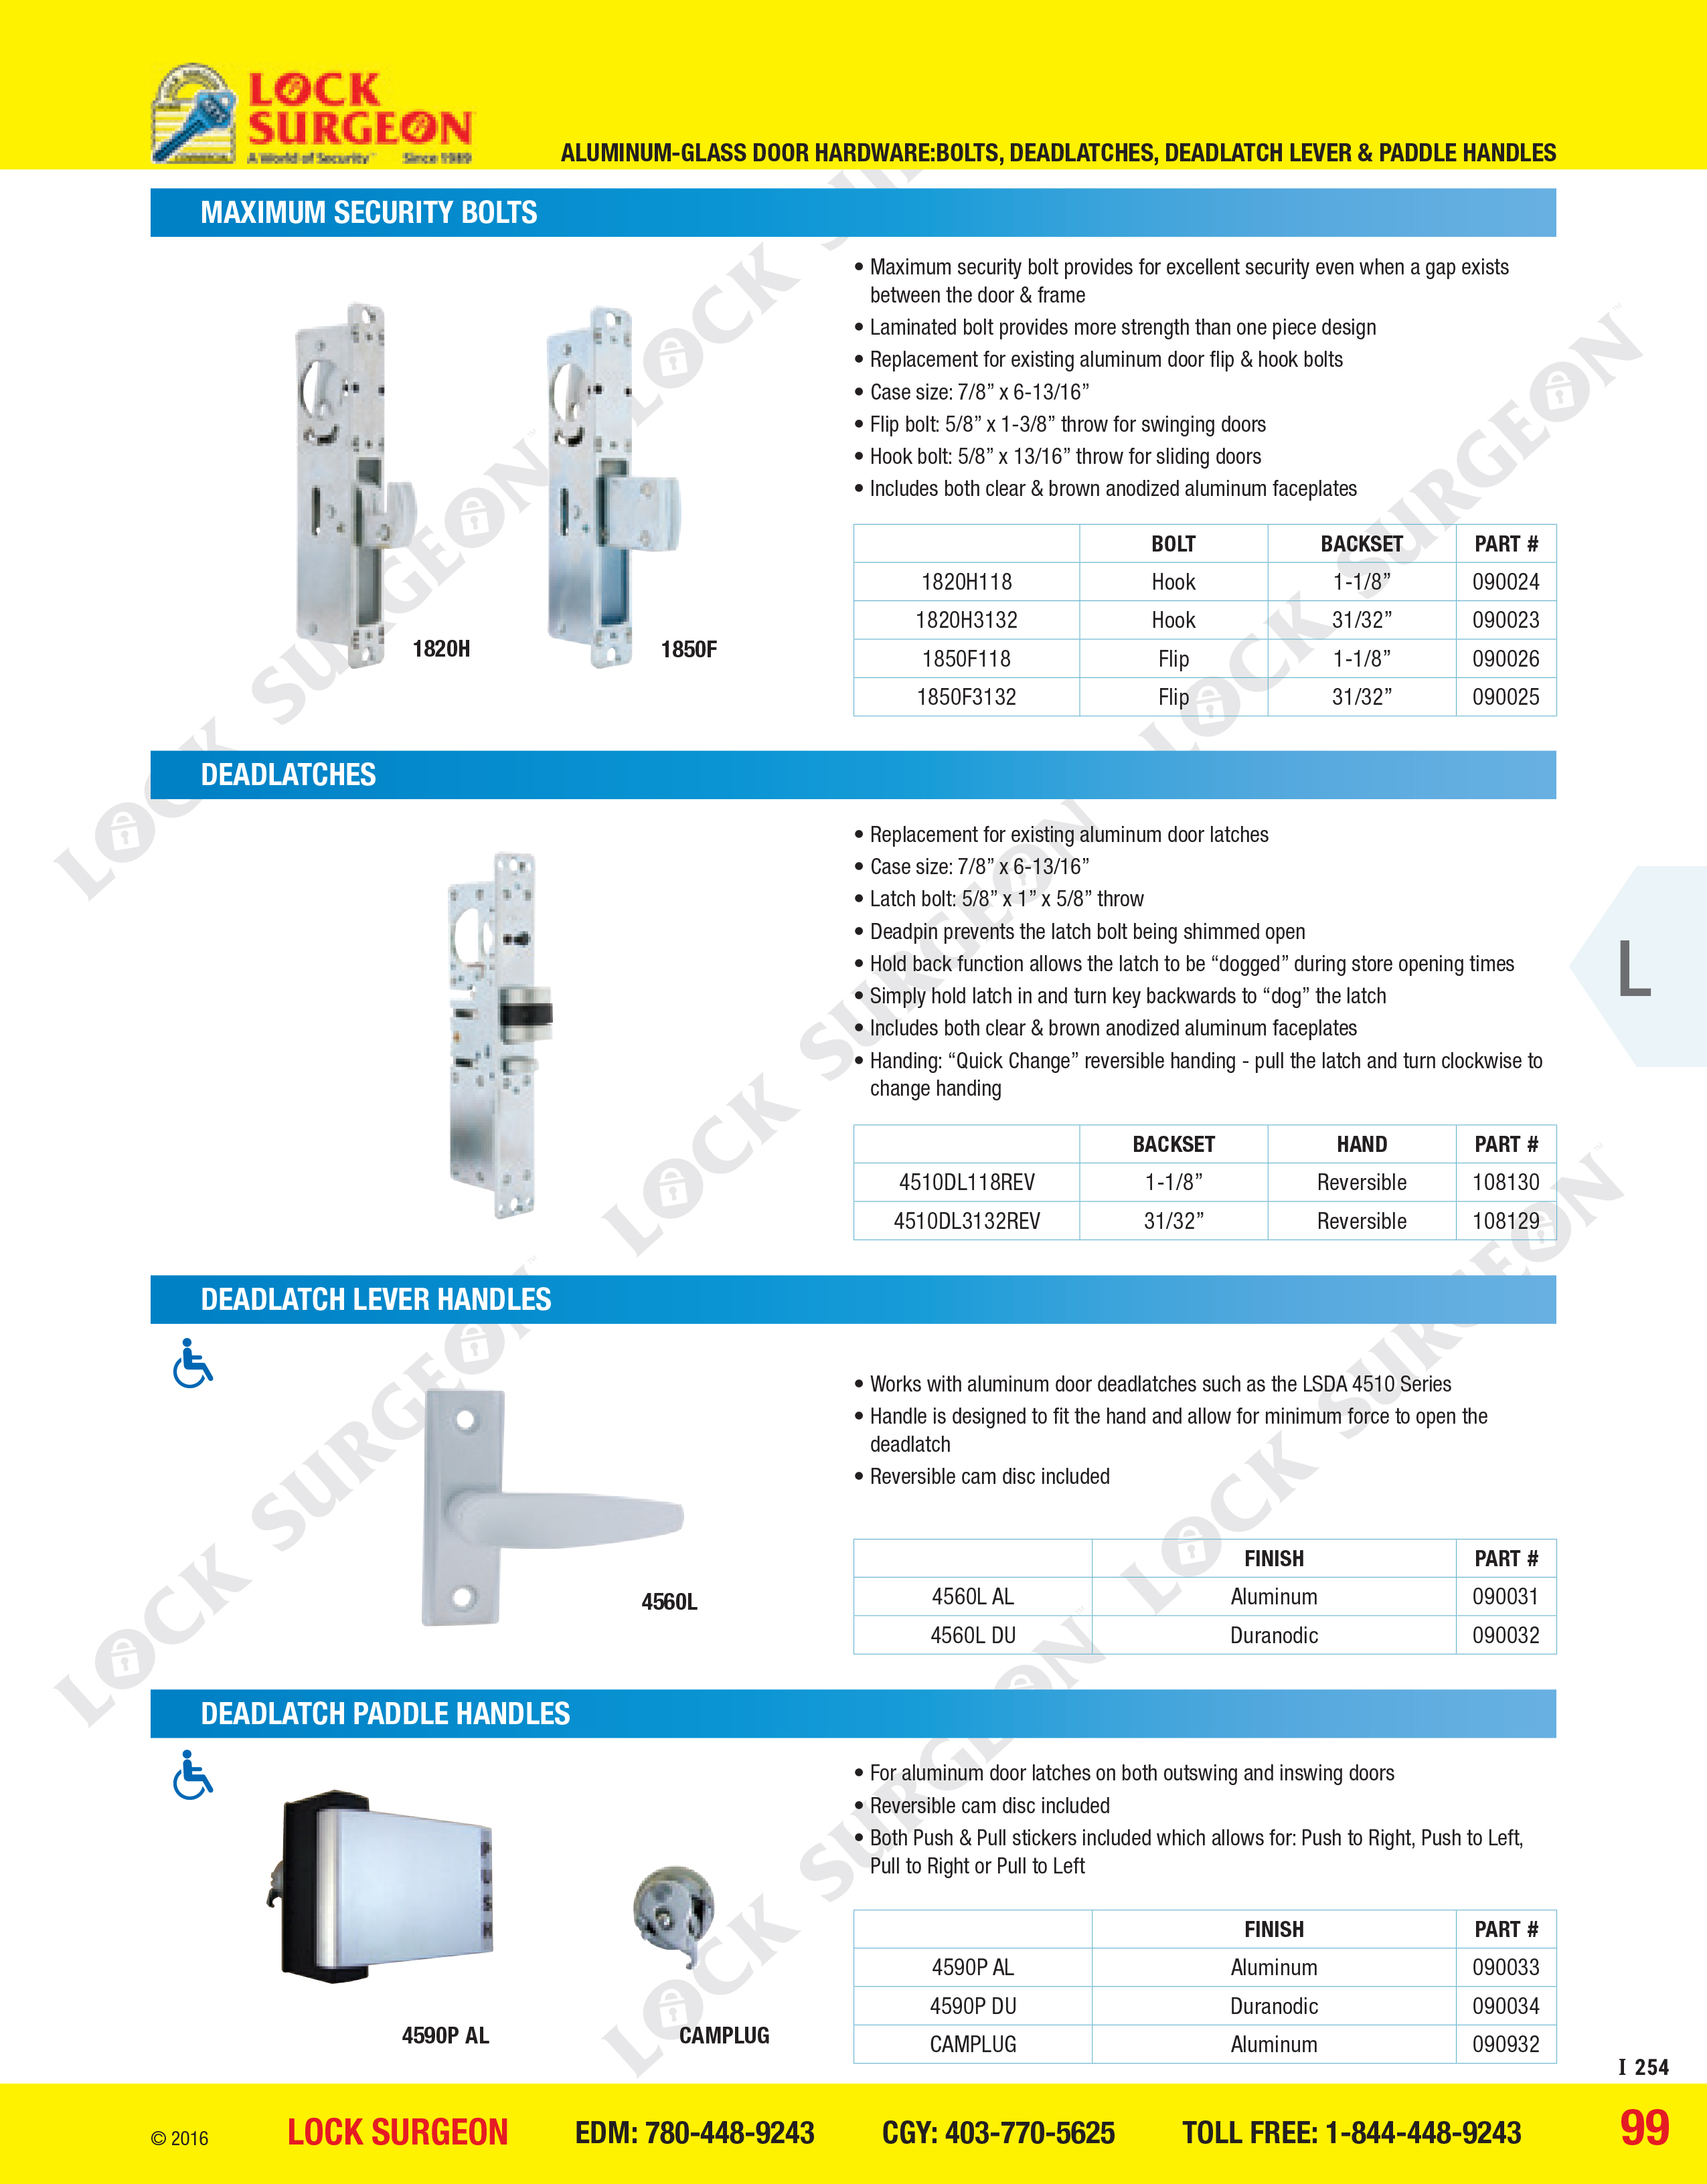 Maximum security bolts, deadlatches, deadlatch lever handles and deadlatch paddle handles